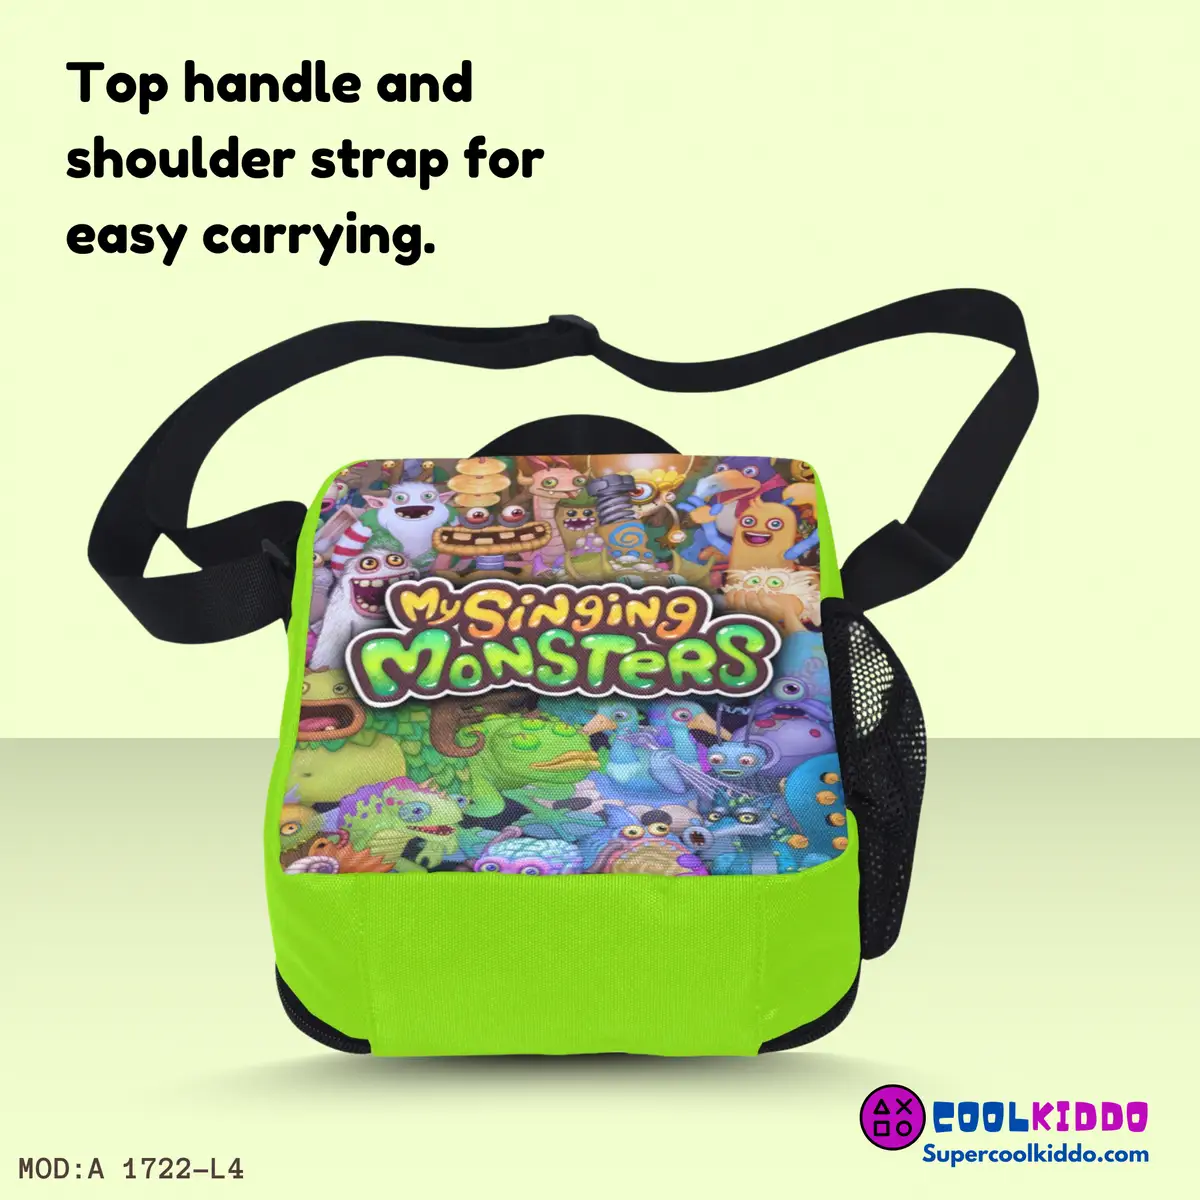 My Singing Monsters Insulated Lunch Bag, Personalized, Nylon Construction, Easy to Clean, Kids Lunchbox Cool Kiddo 18